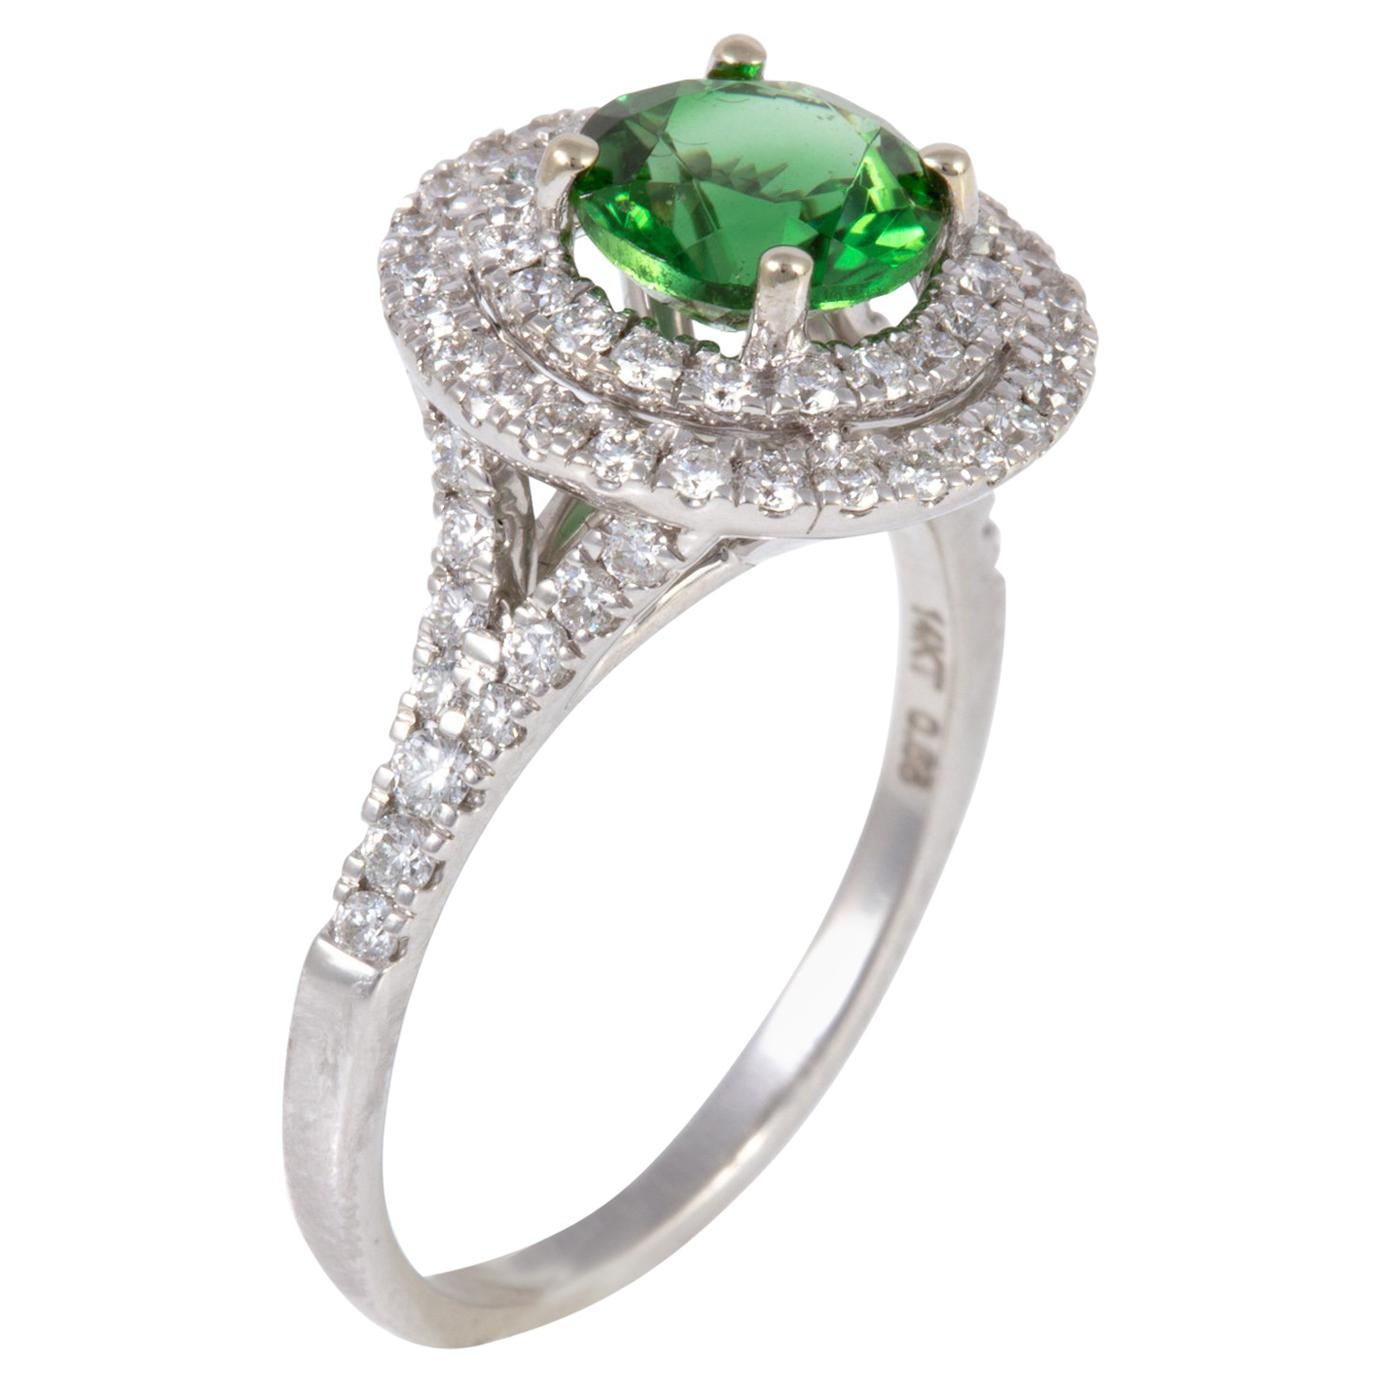 Exceptionally Well Cut 1.26 Carat Chrome Tourmaline and Diamond Ring